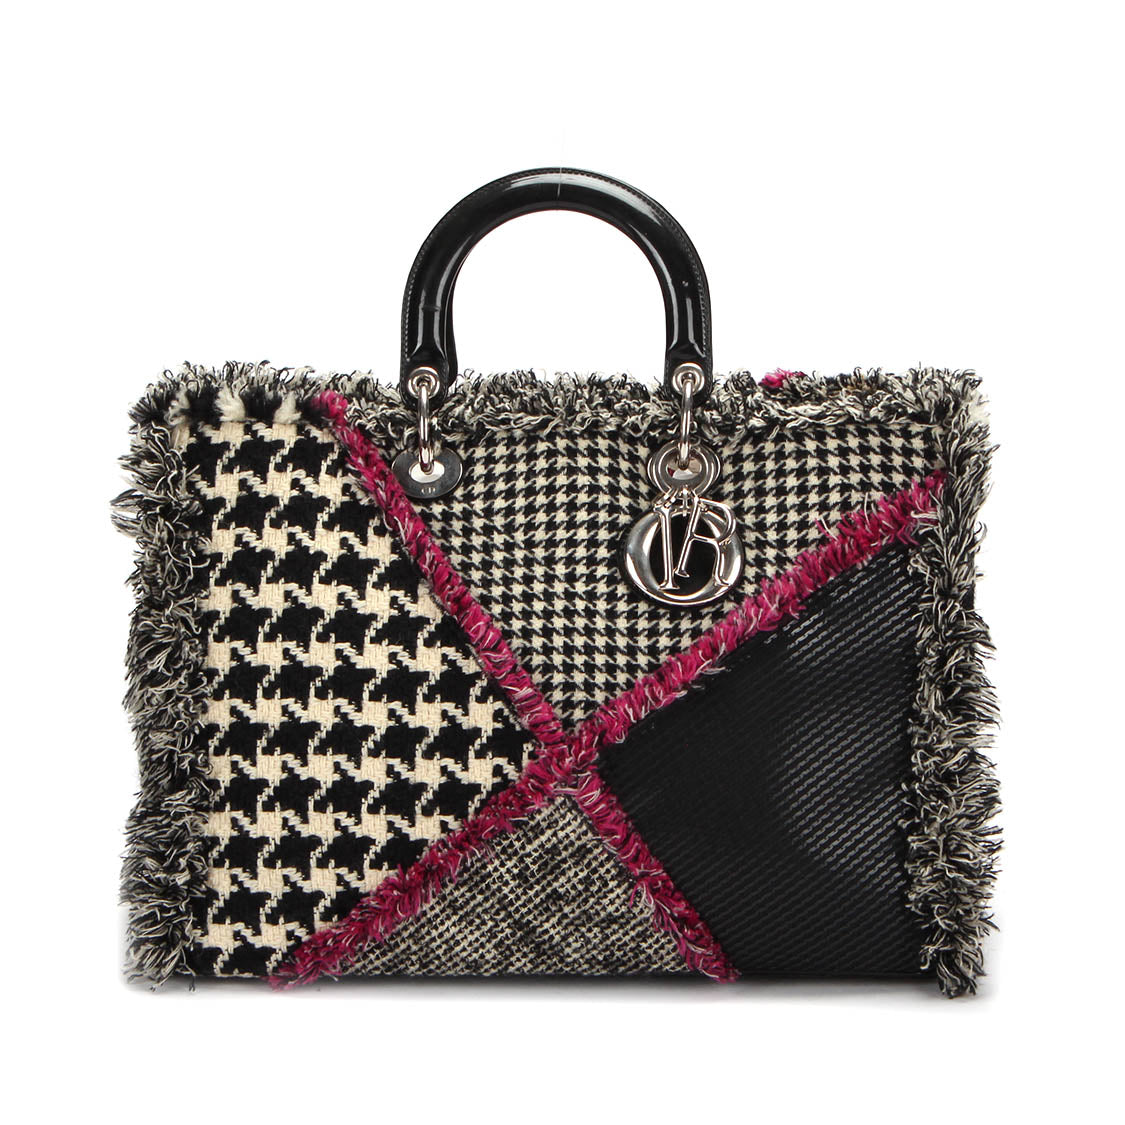 Houndstooth Diorissimo Toteバッグ